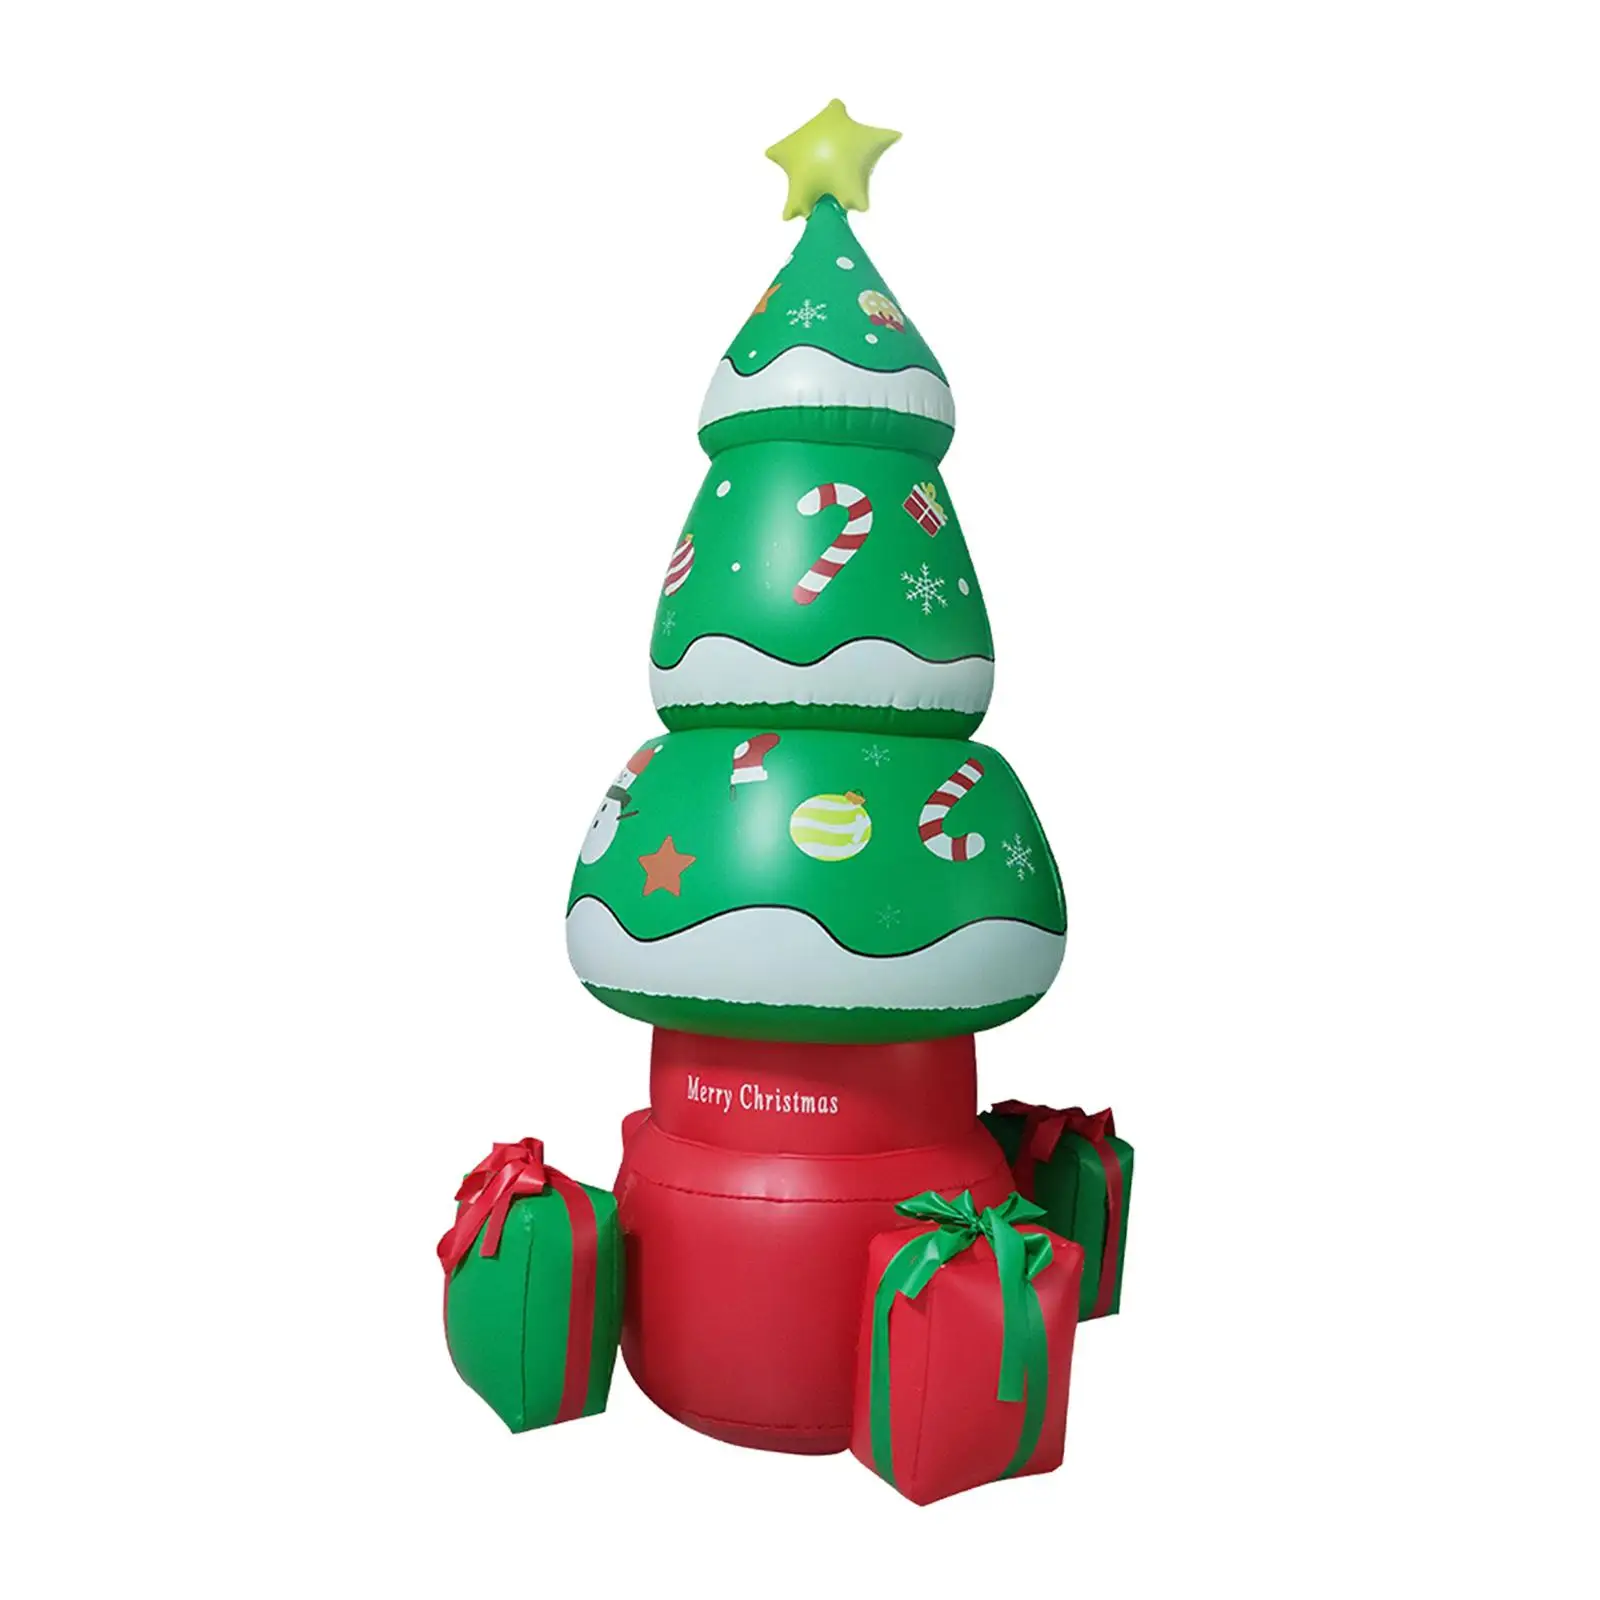 Inflatable Christmas Tree Decorative Tree Xmas Tree Light up for Lawn Holiday Decor Prop